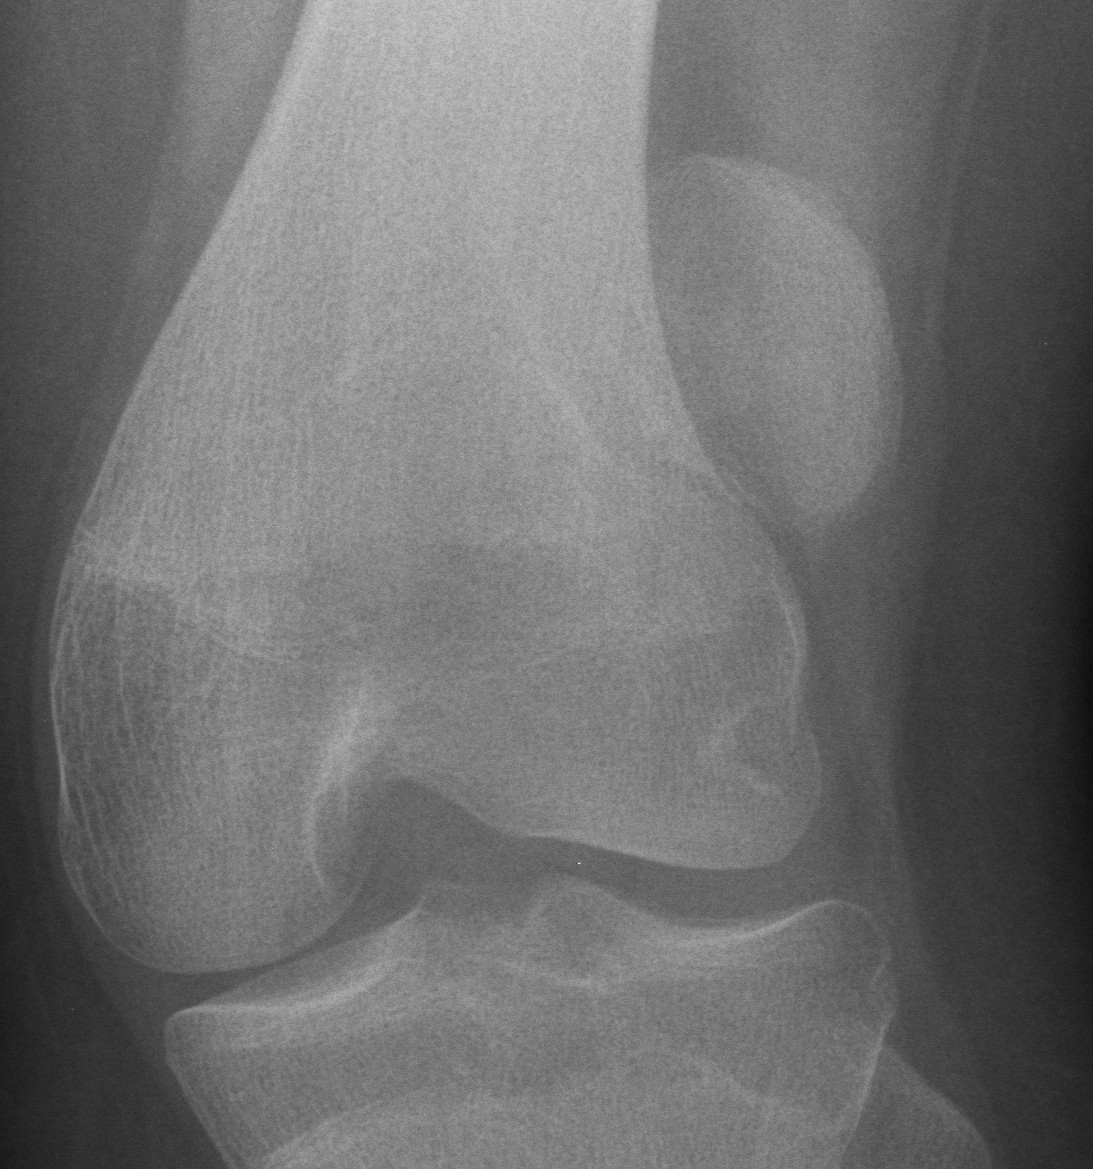 x ray of dislocated knee